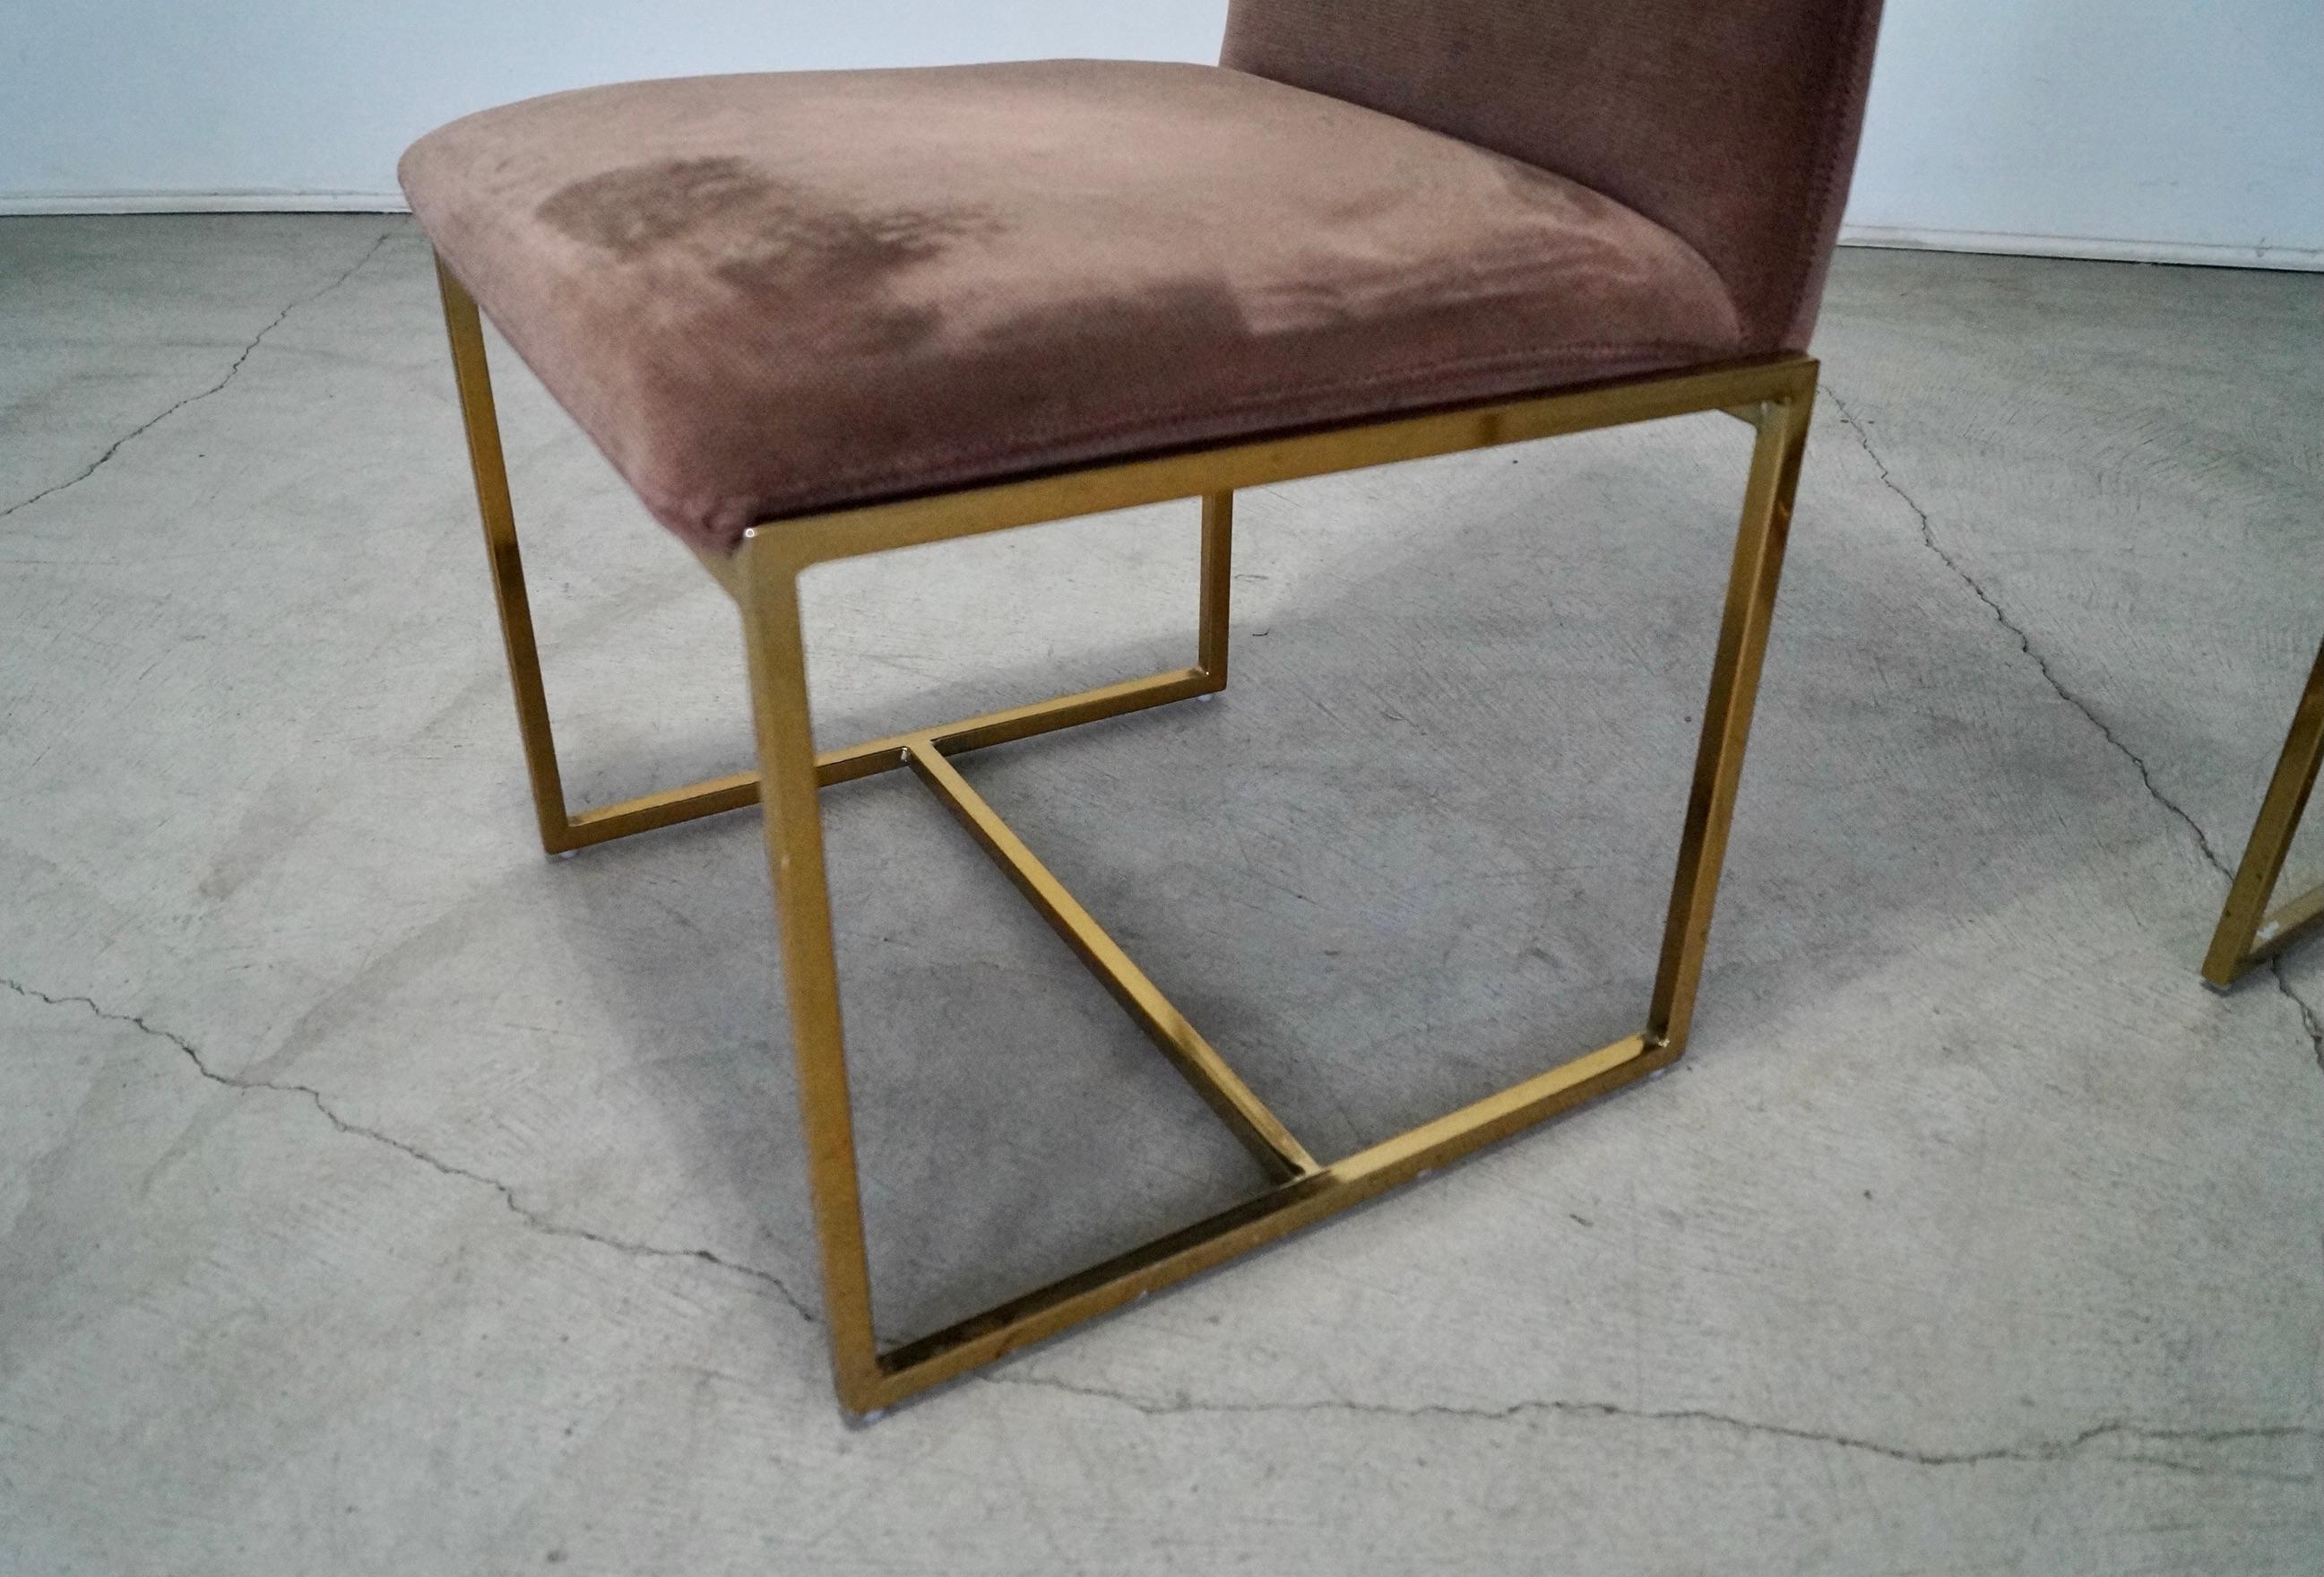 1970's Mid-Century Modern Milo Baughman Style Brass Dining Chairs - a Pair For Sale 12